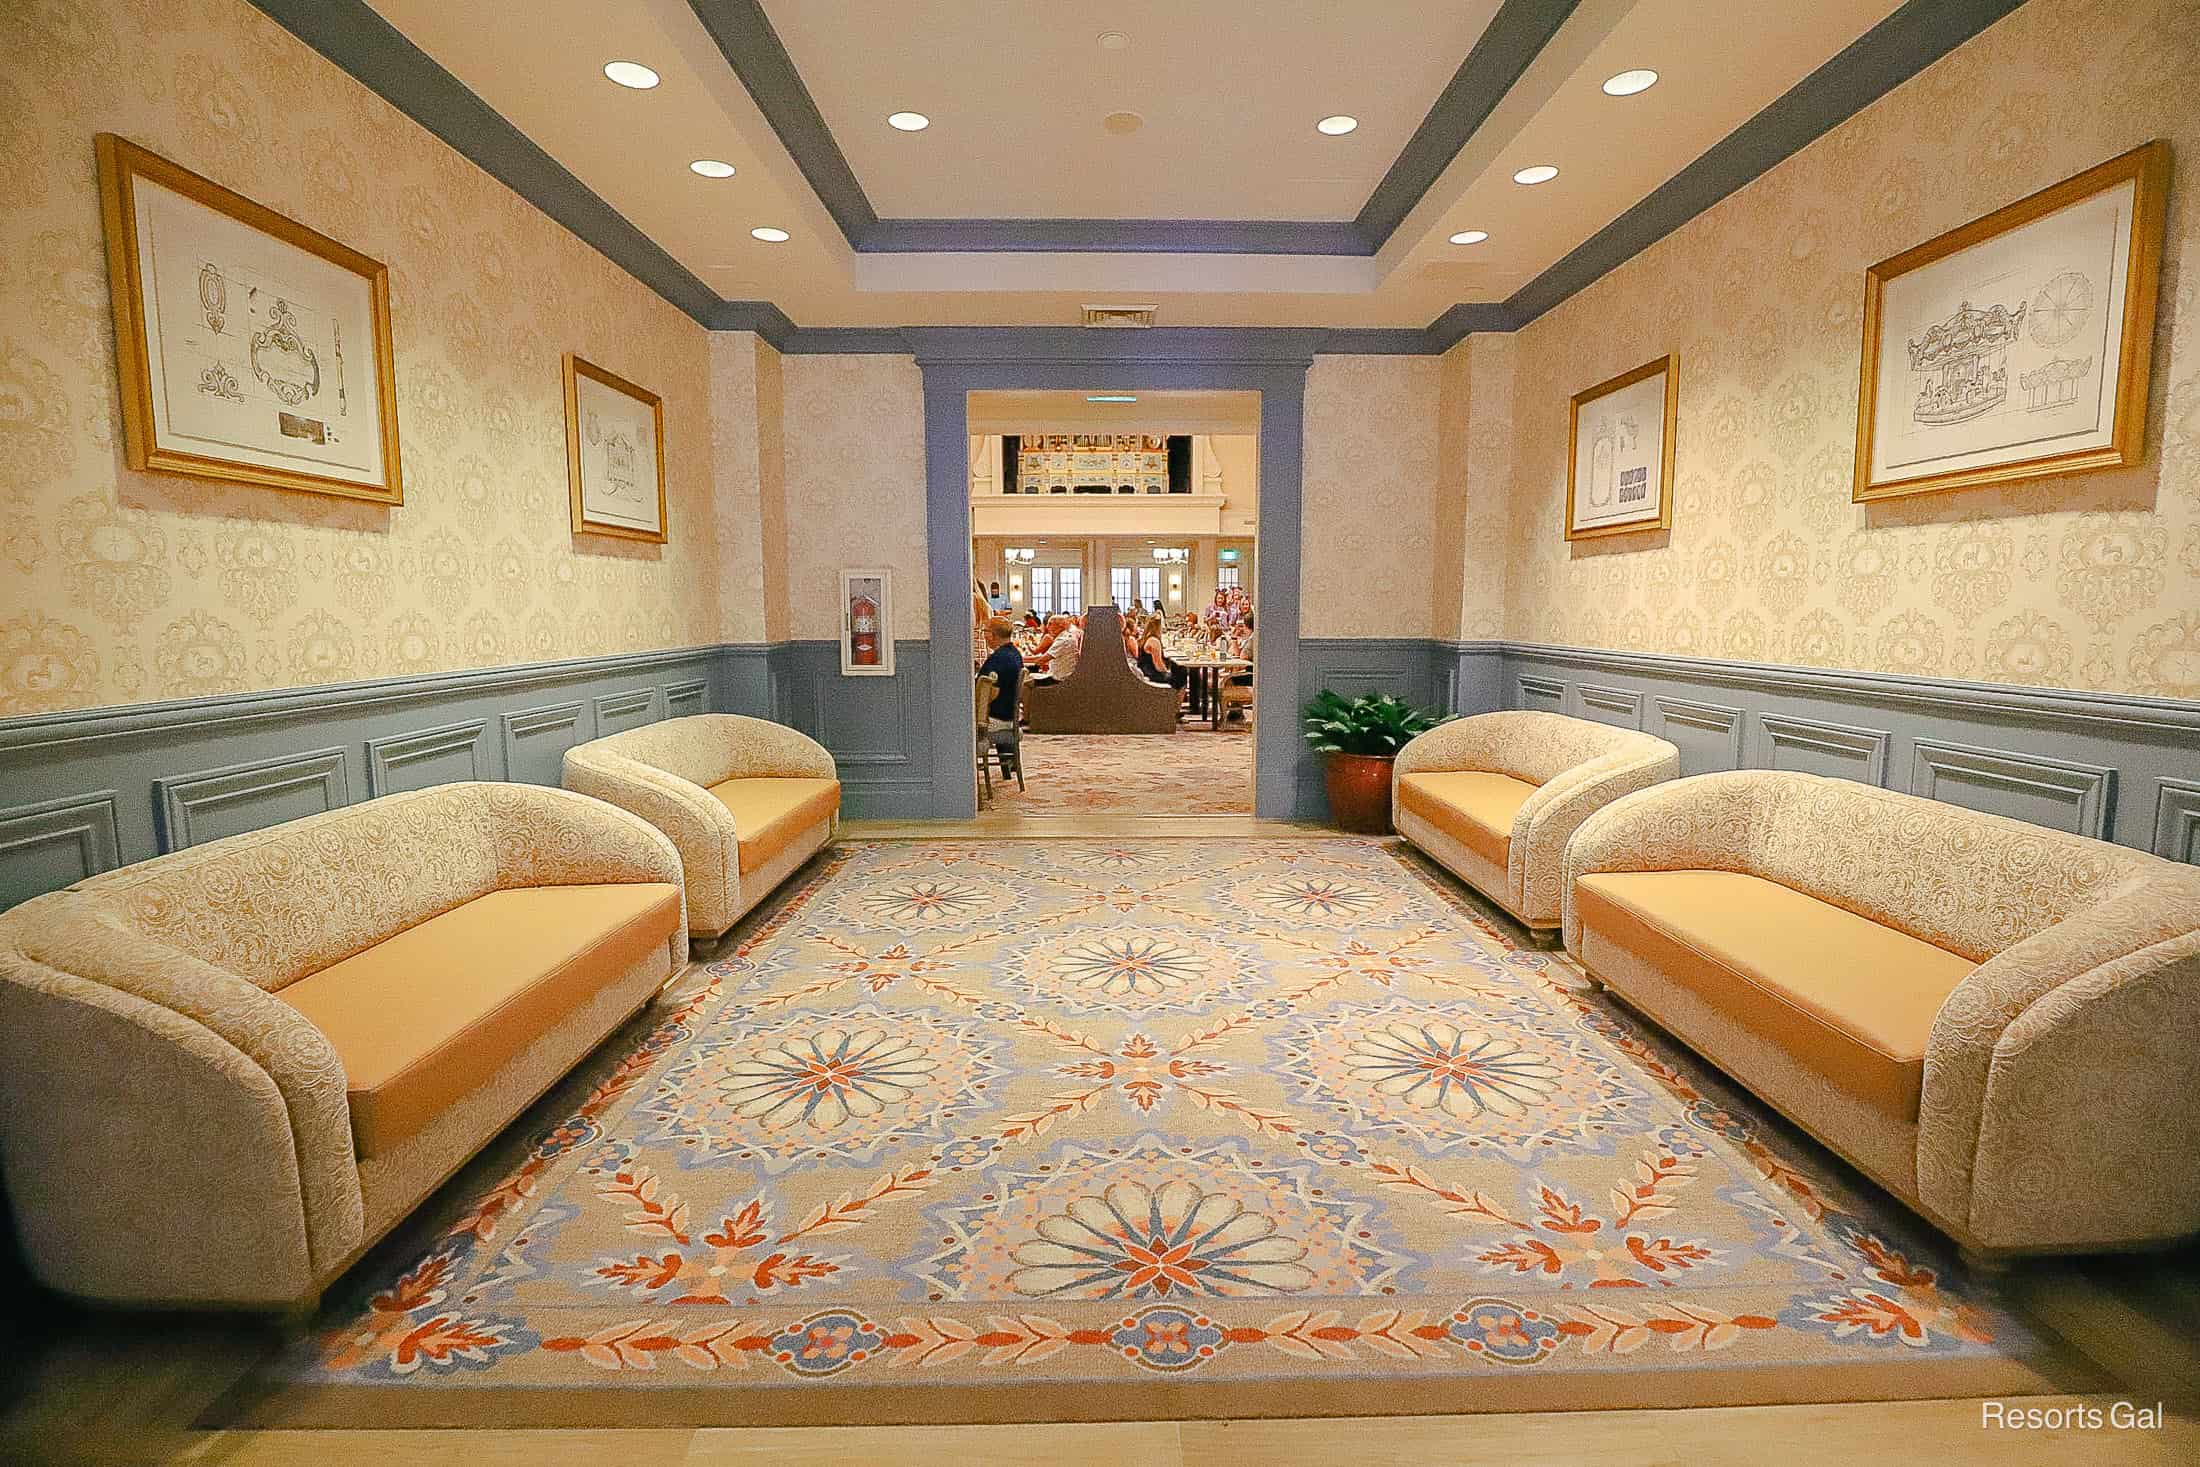 the small lobby at the entrance of 1900 Park Fare at Disney's Grand Floridian 